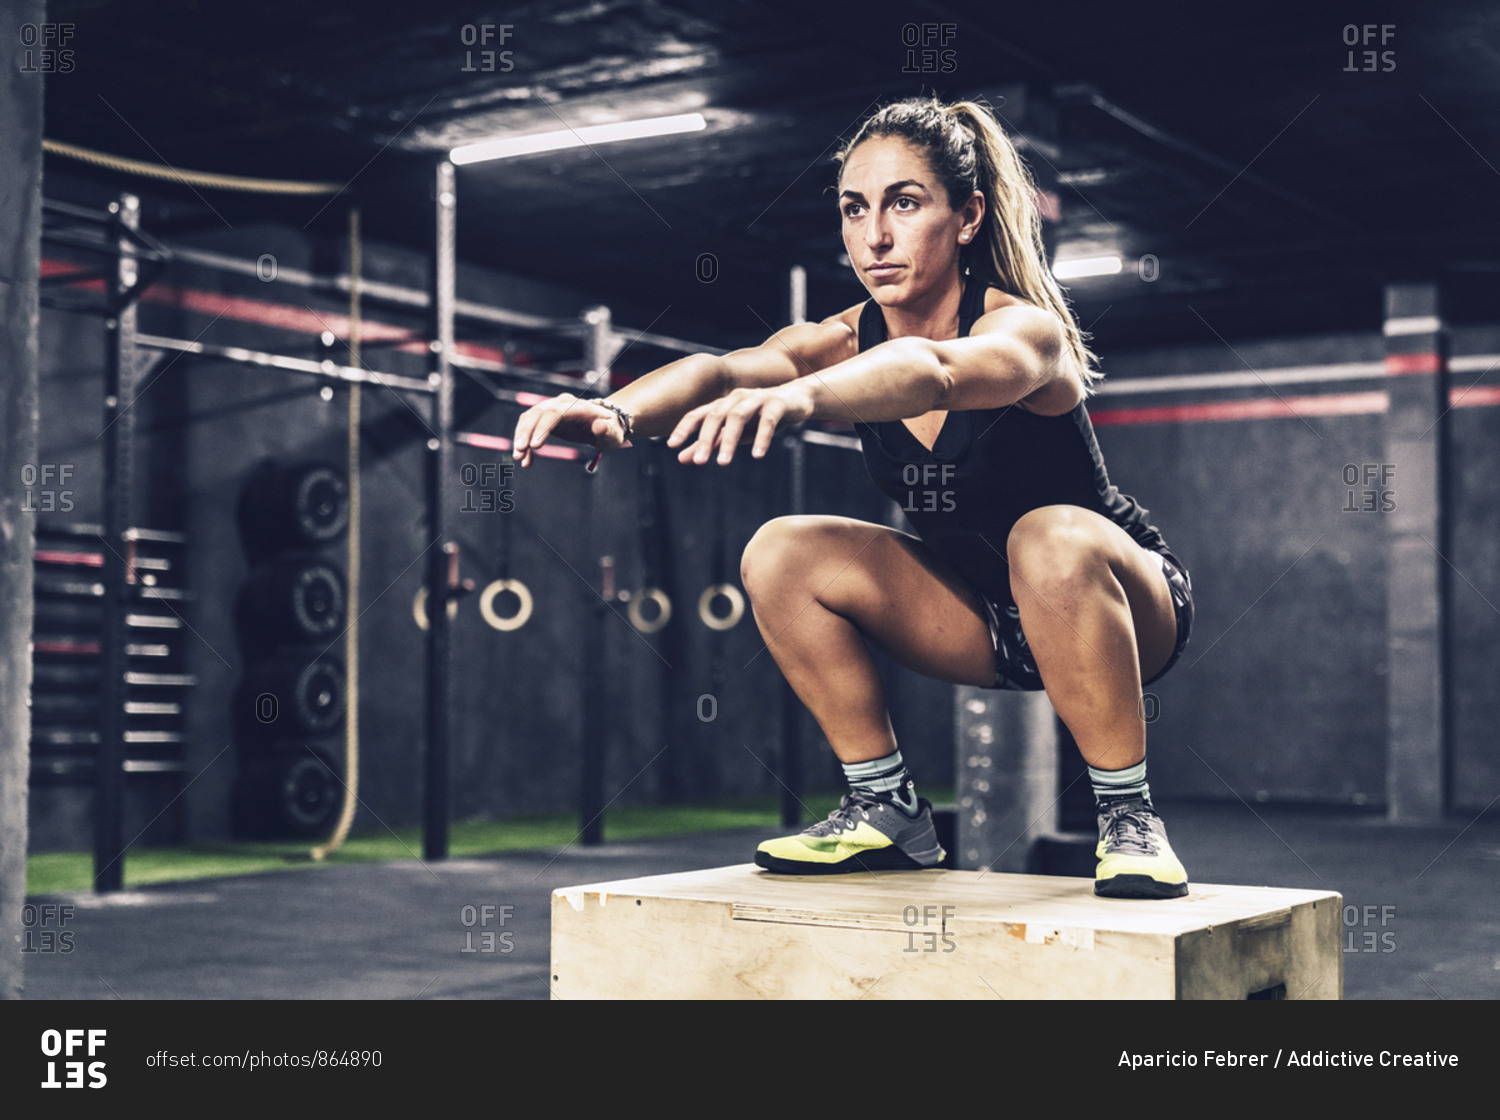 Athletic woman jumping on box to improve stamina in gym